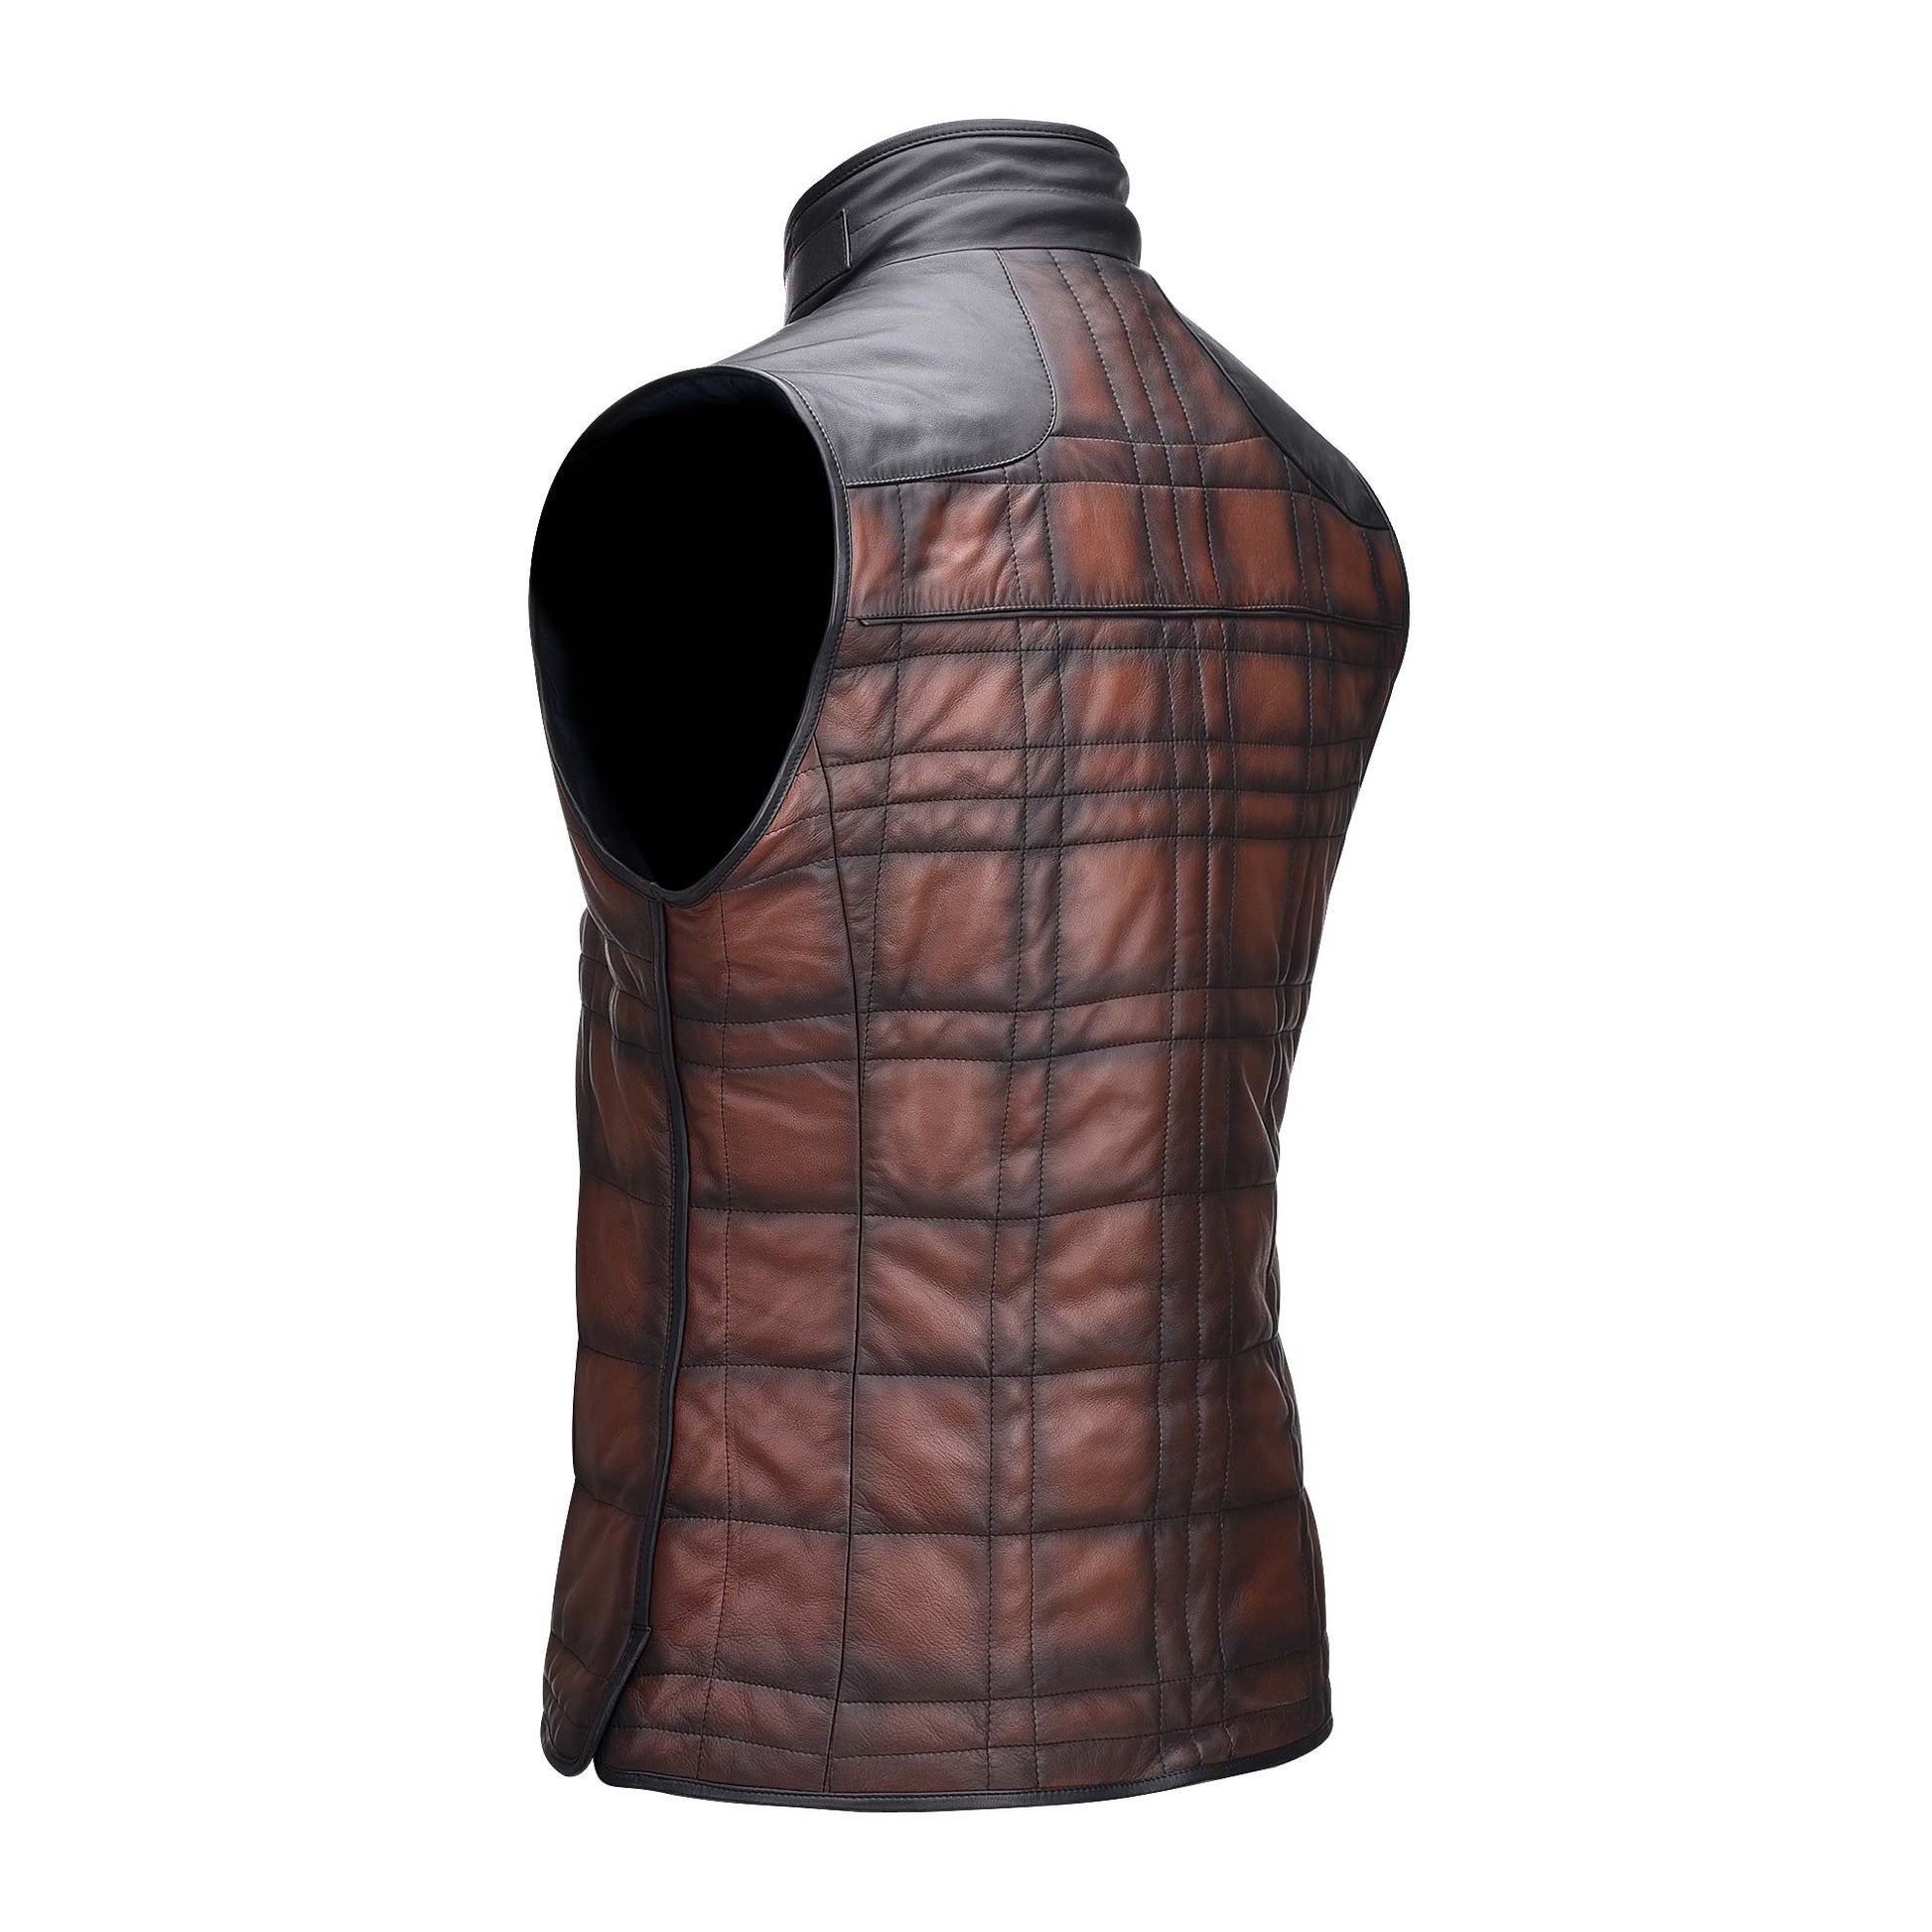 Embroidered brown reversible vest